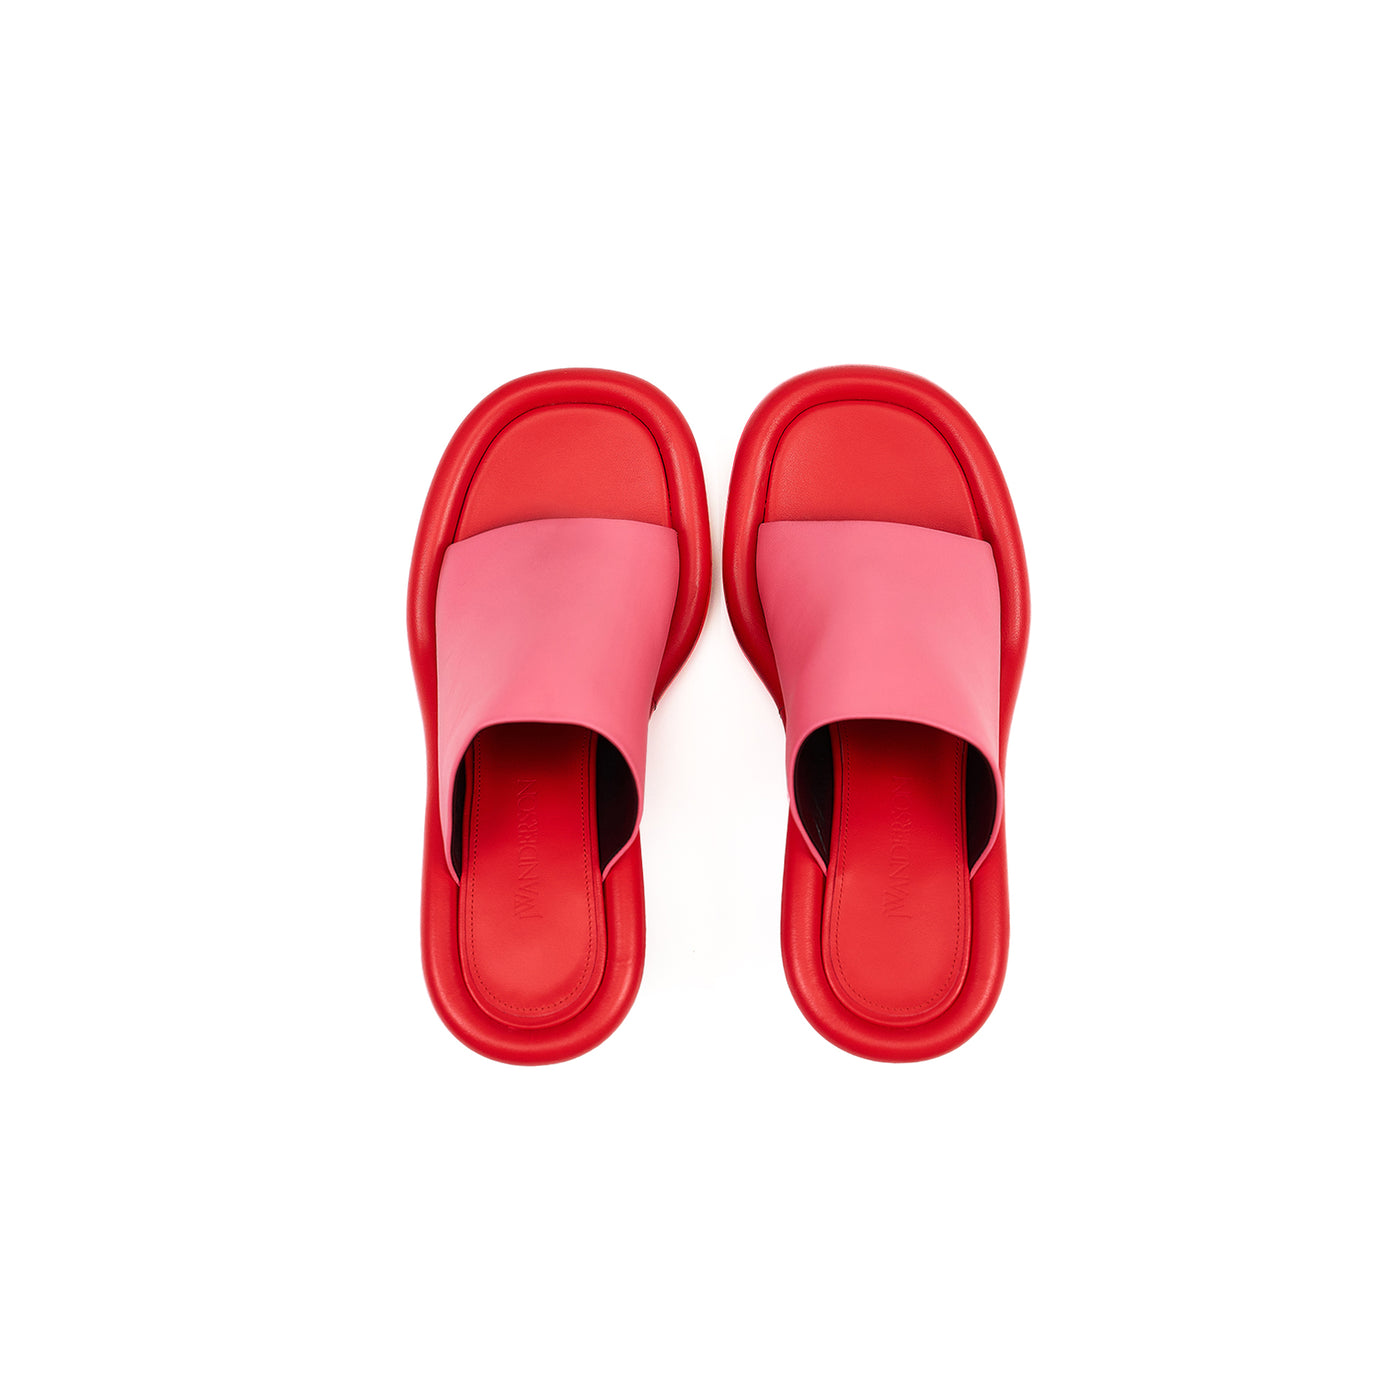 Bumper-Tube Leather Mules (Pink/Red)